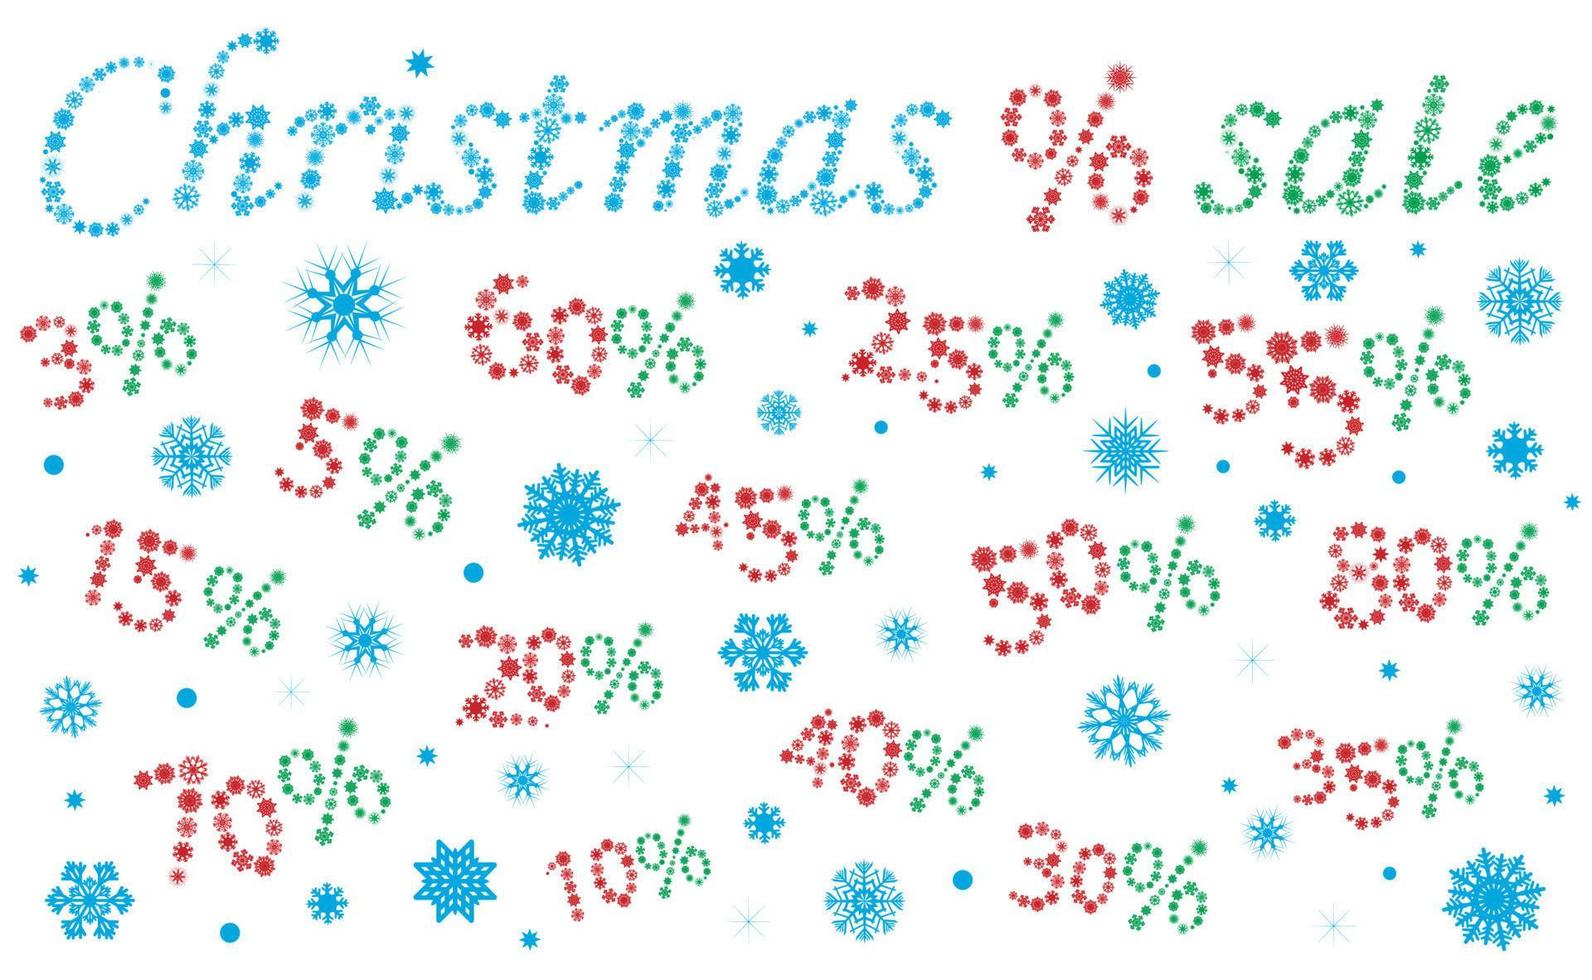 Christmas sale. Vector illustration percent discounts for Christmas and New Year sales. Made in the form of snowflakes.